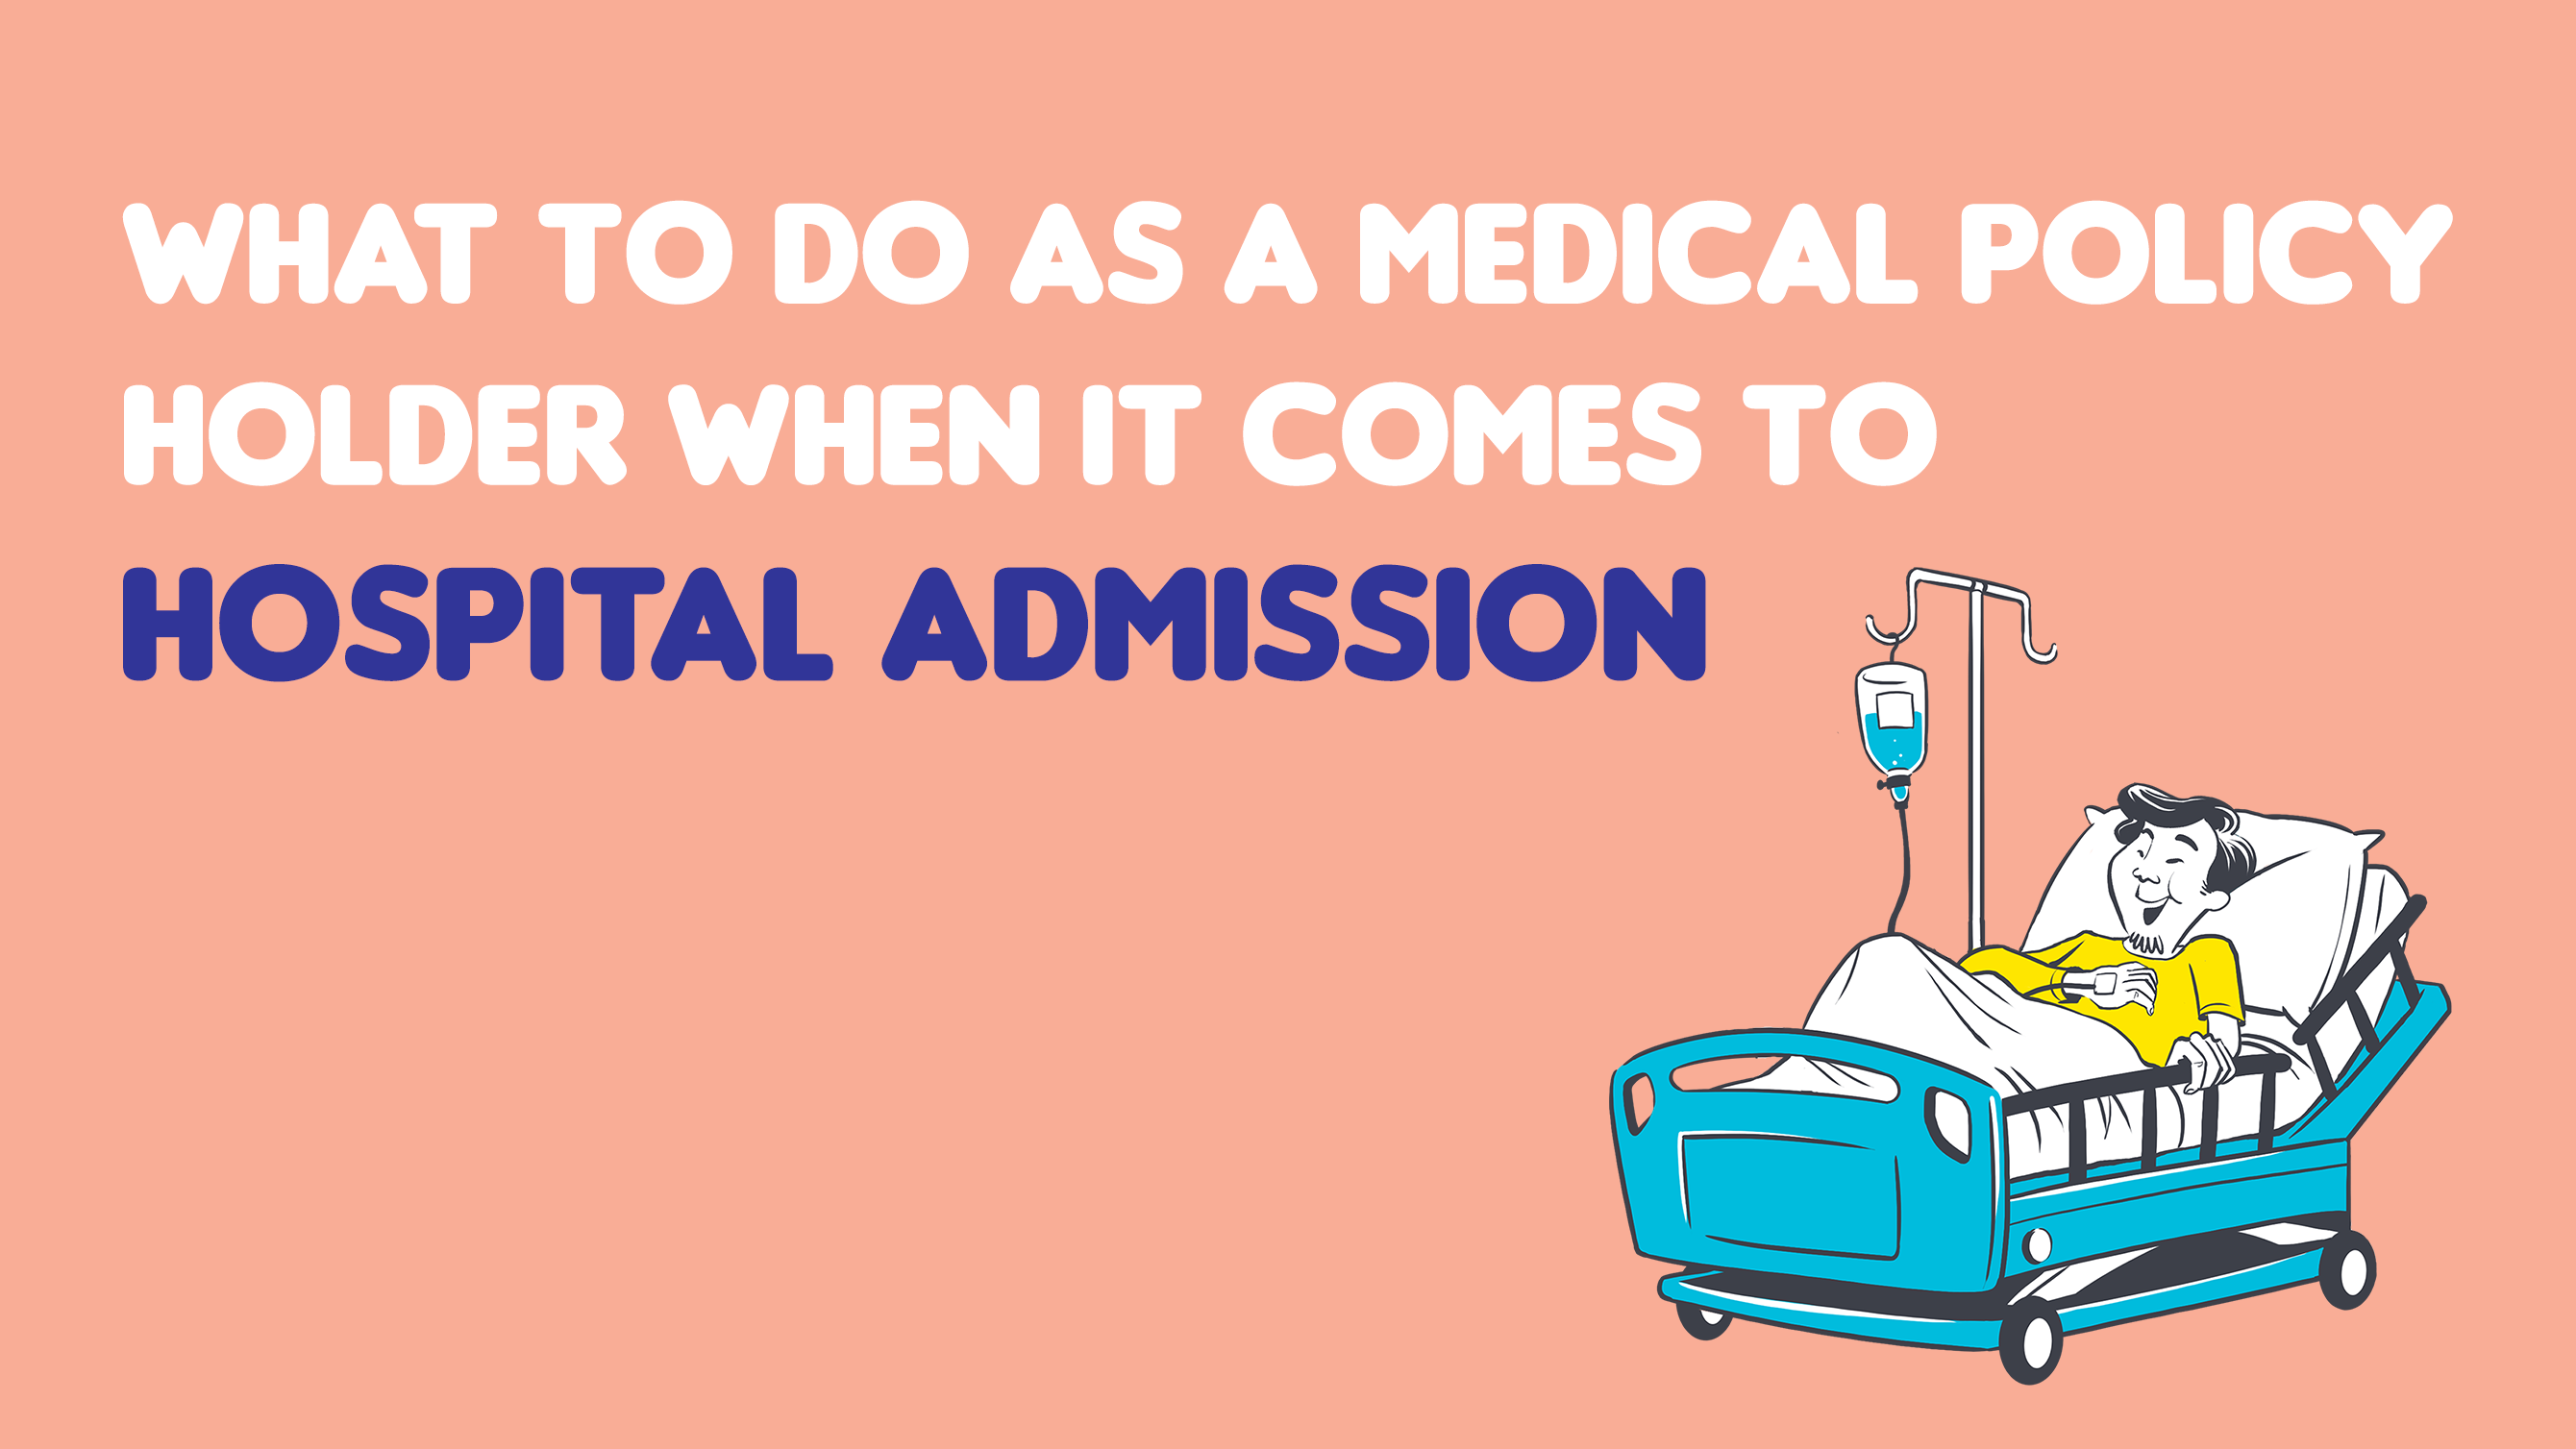 What To Do As a Medical Policyholder for Hospital Admission